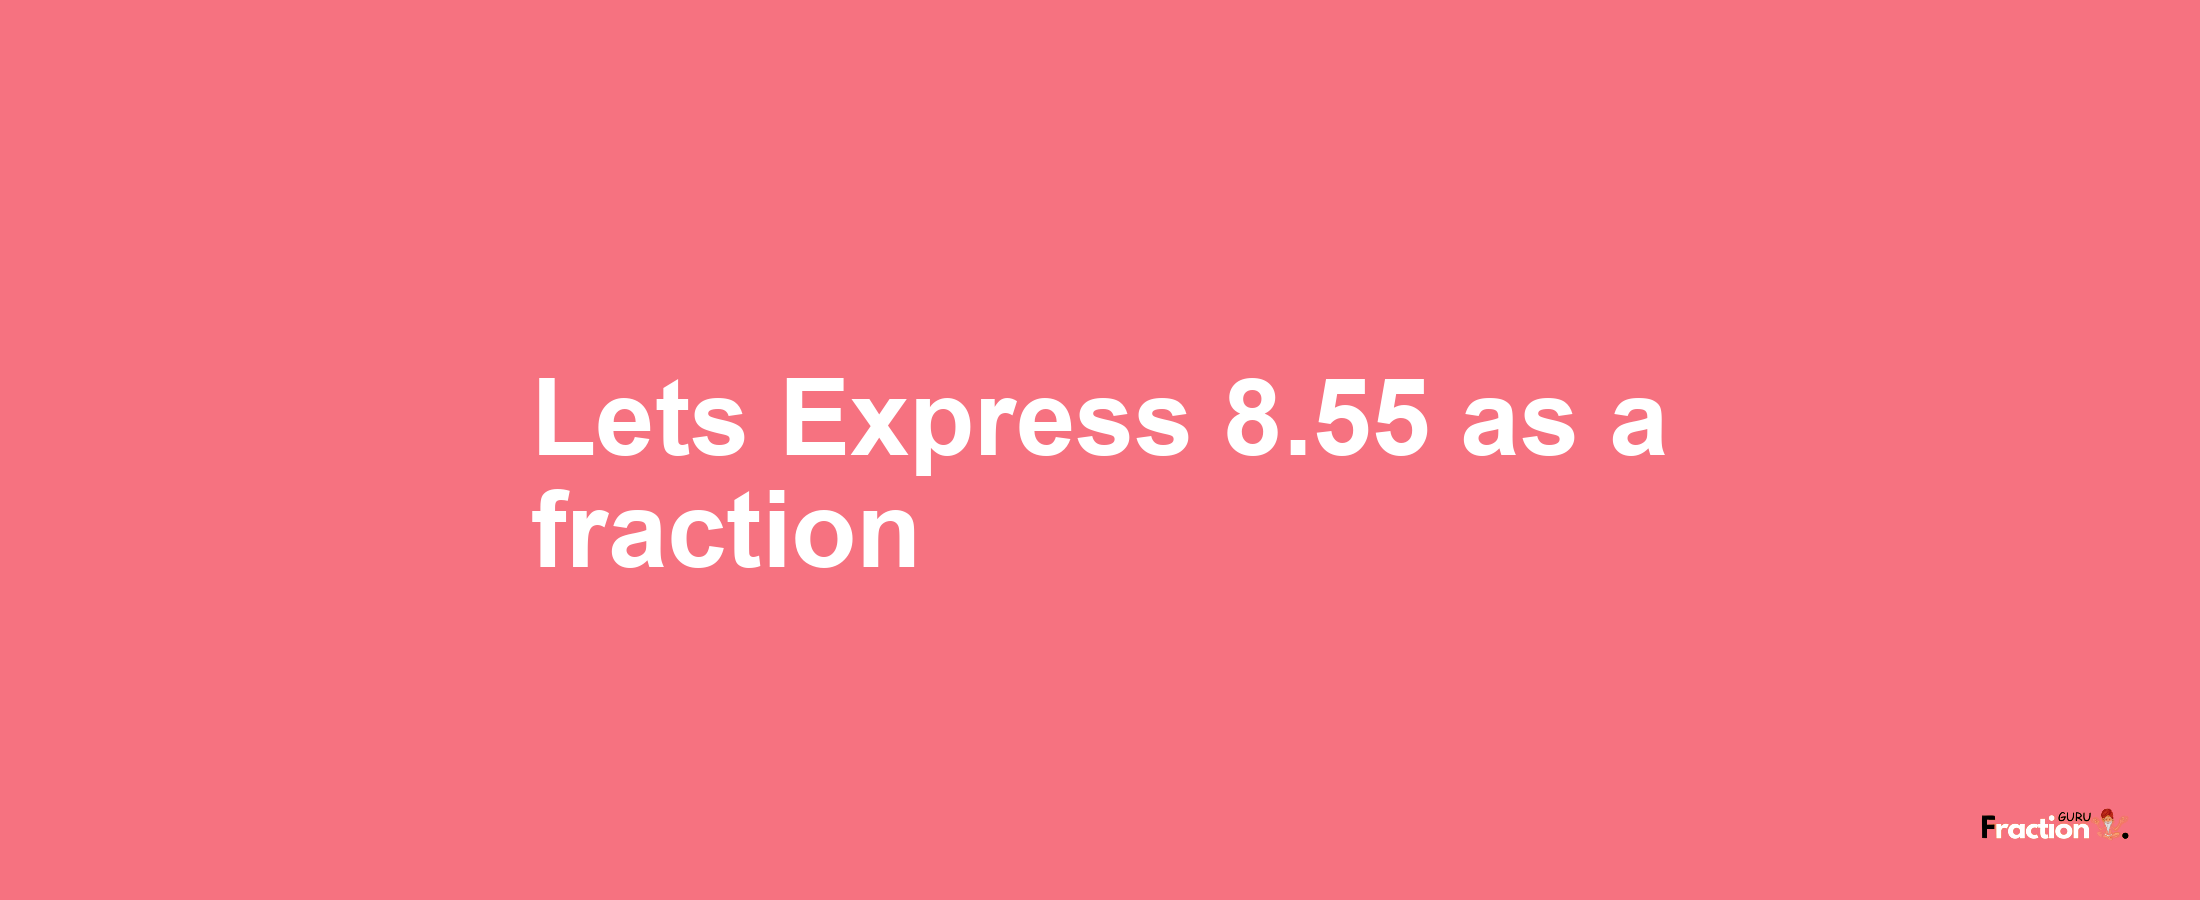 Lets Express 8.55 as afraction